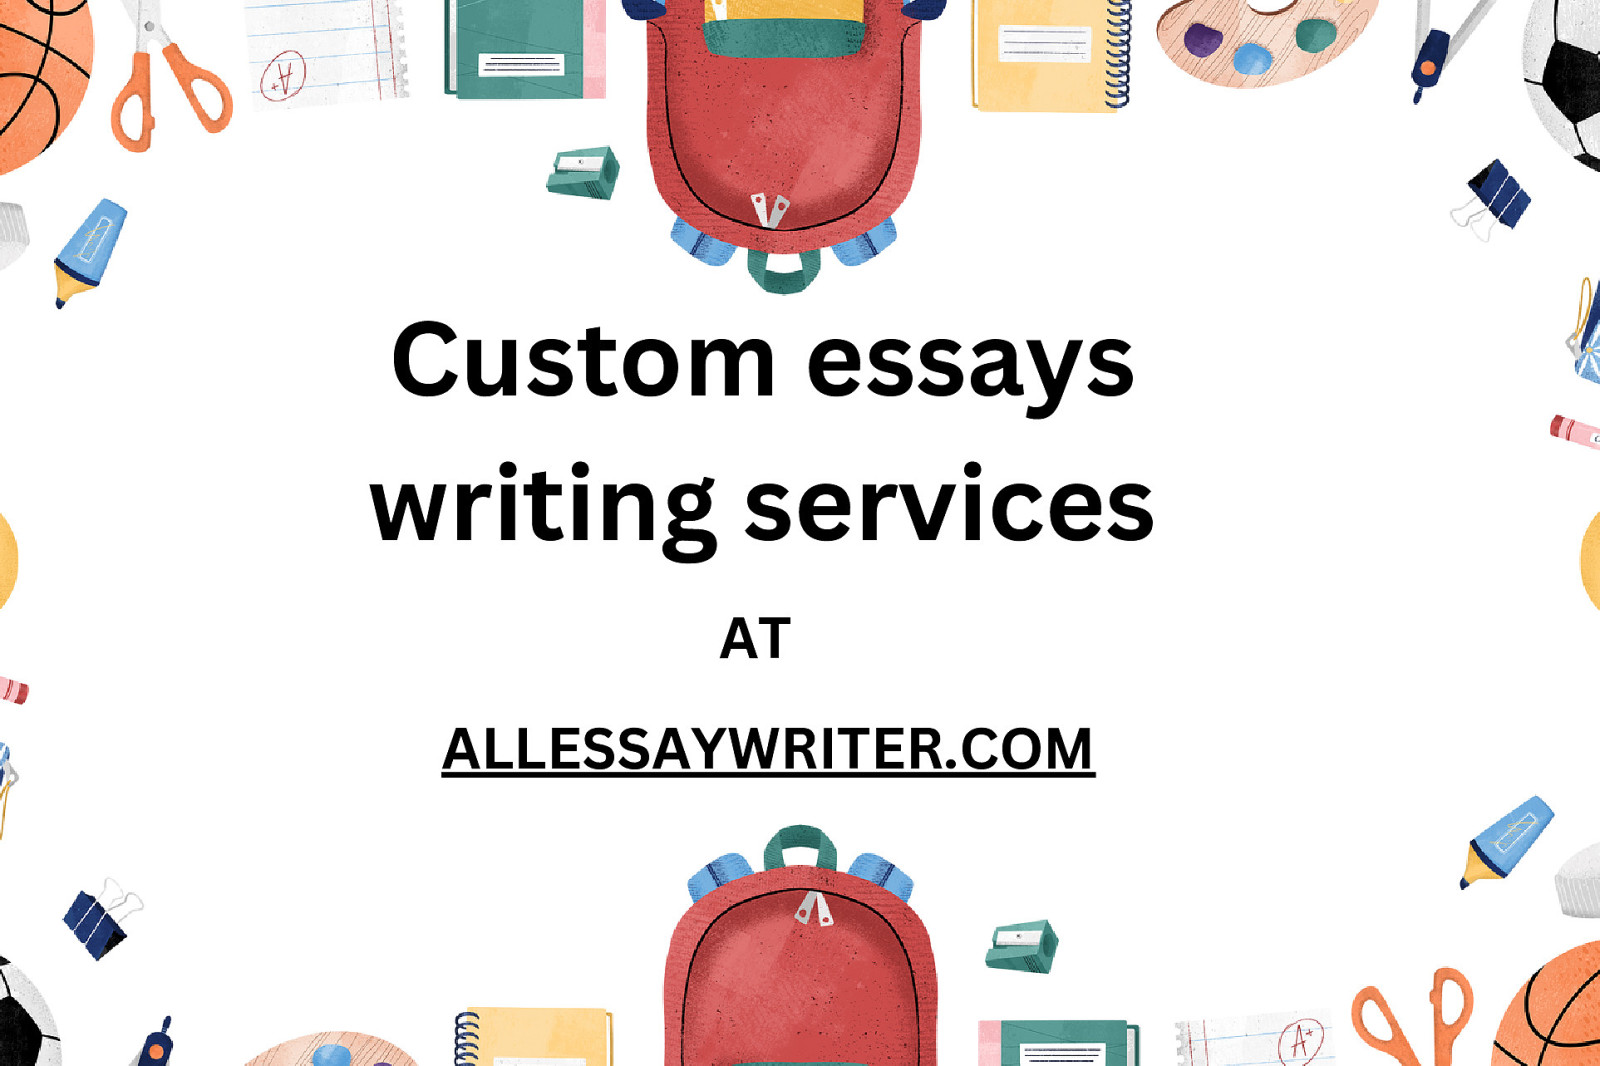 custom essays writing services: Your Key to Academic Success by Declan Miller